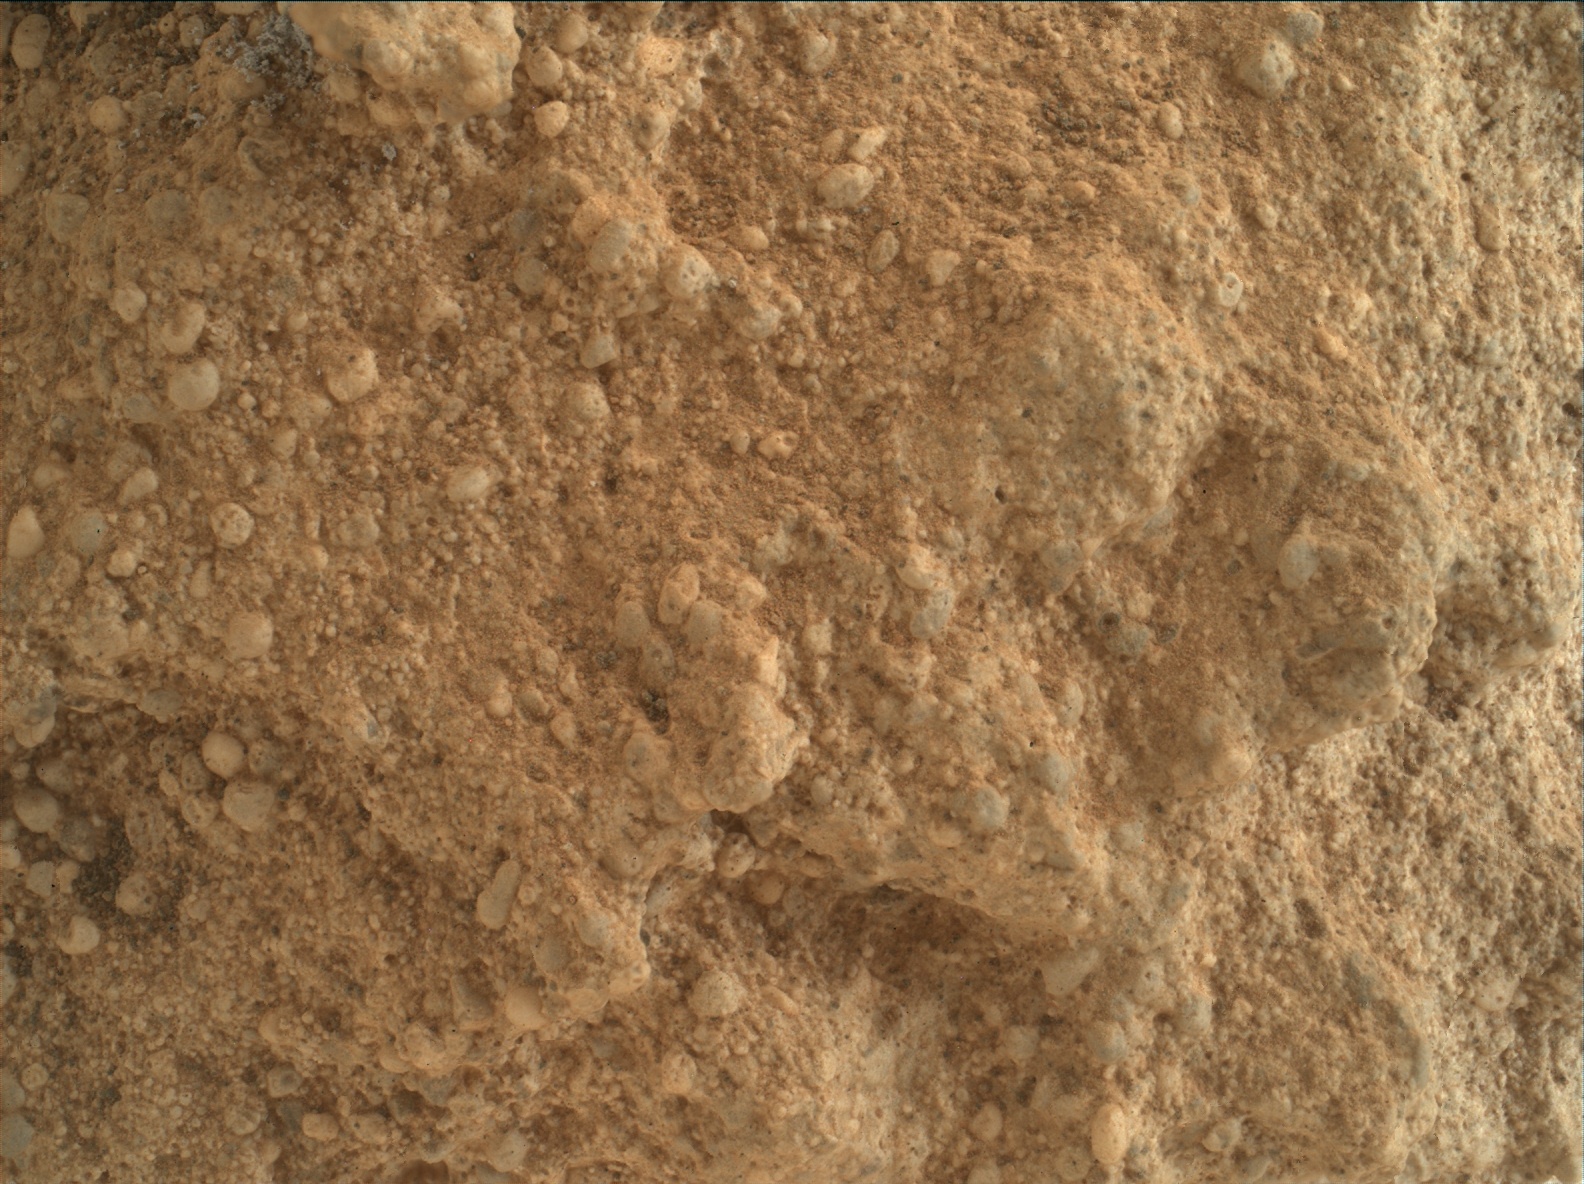 Nasa's Mars rover Curiosity acquired this image using its Mars Hand Lens Imager (MAHLI) on Sol 1092